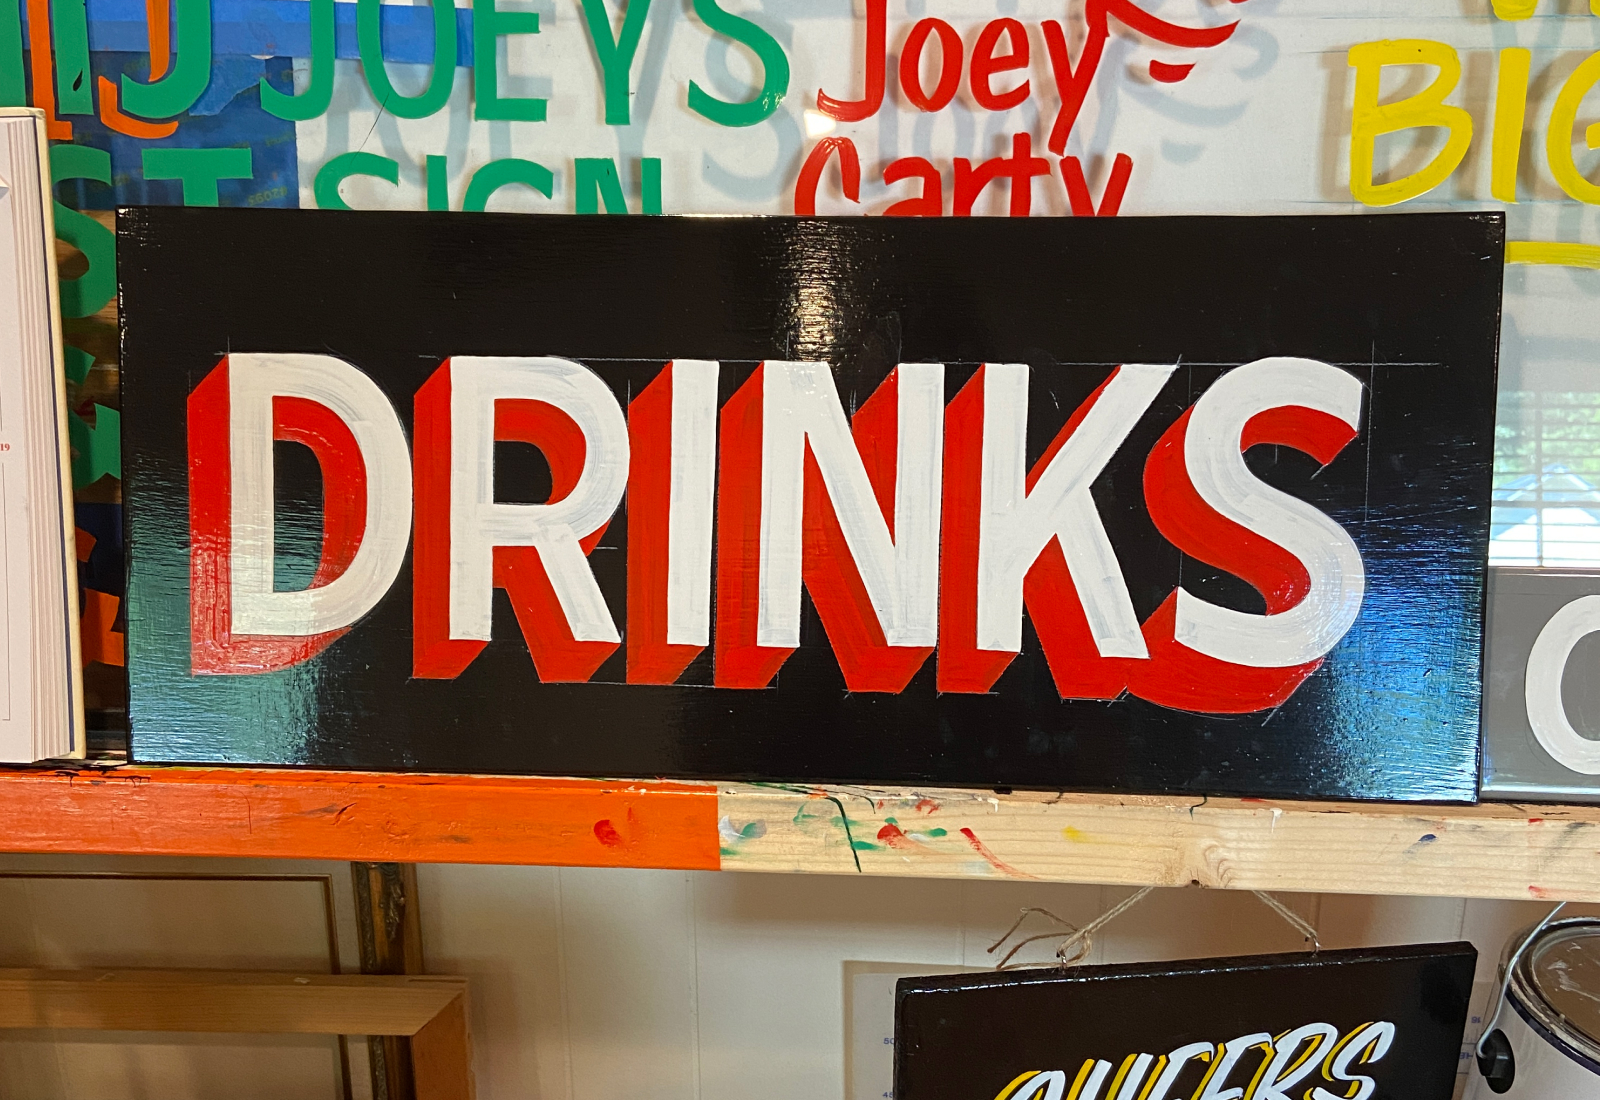 Drinks | Hand Painted Sign by Joey Carty